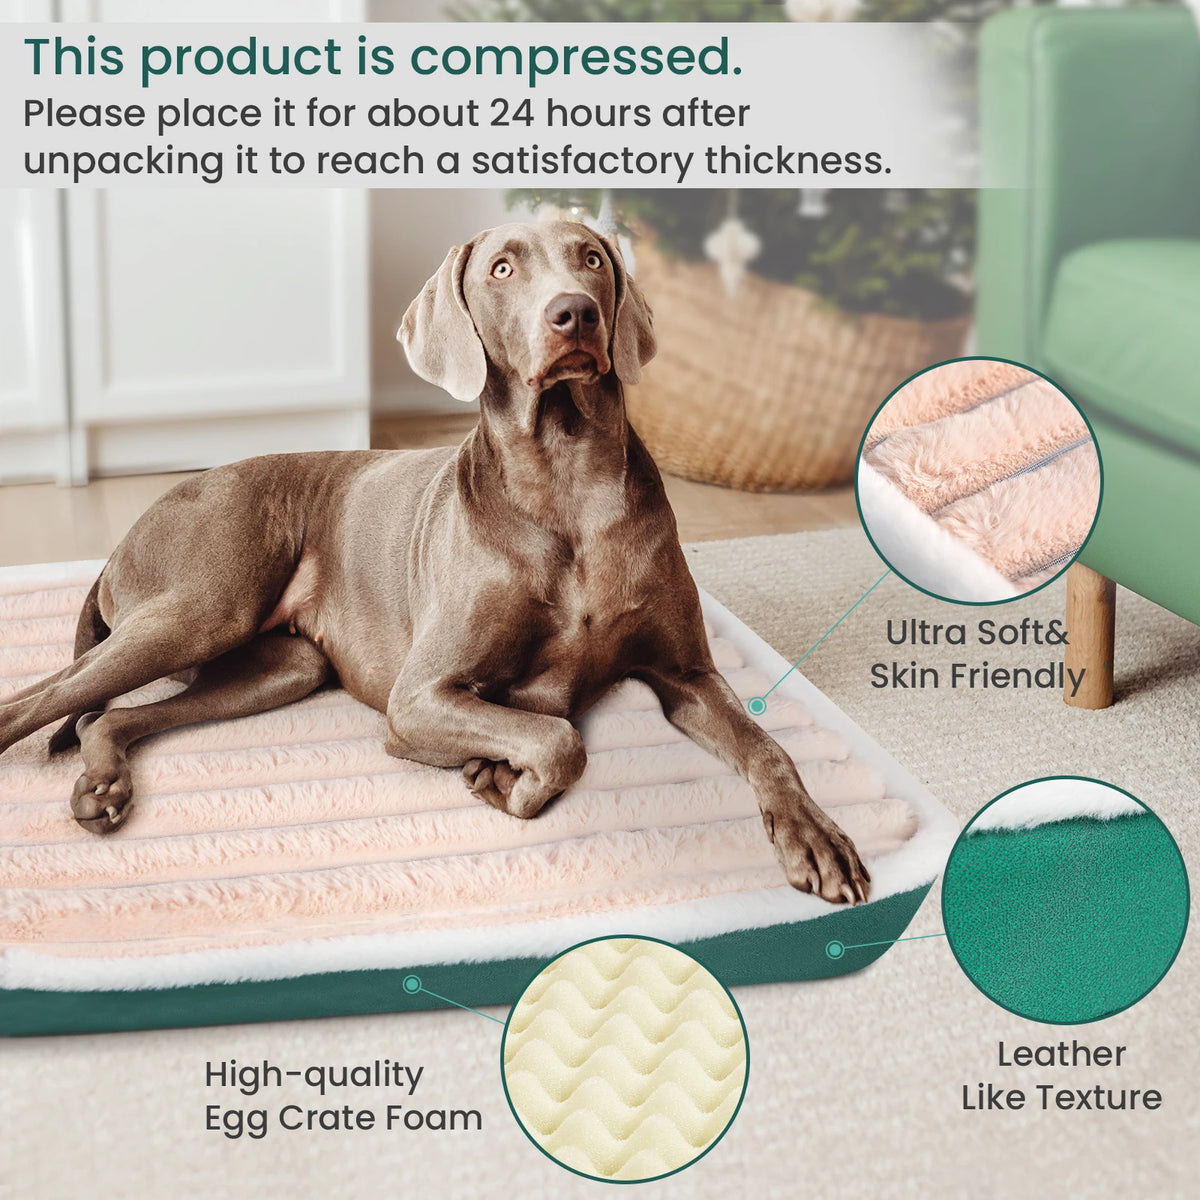 Cozy Retreat: Winter-Warm Dog Bed Mat with Anti-Tear and Bite Resistance